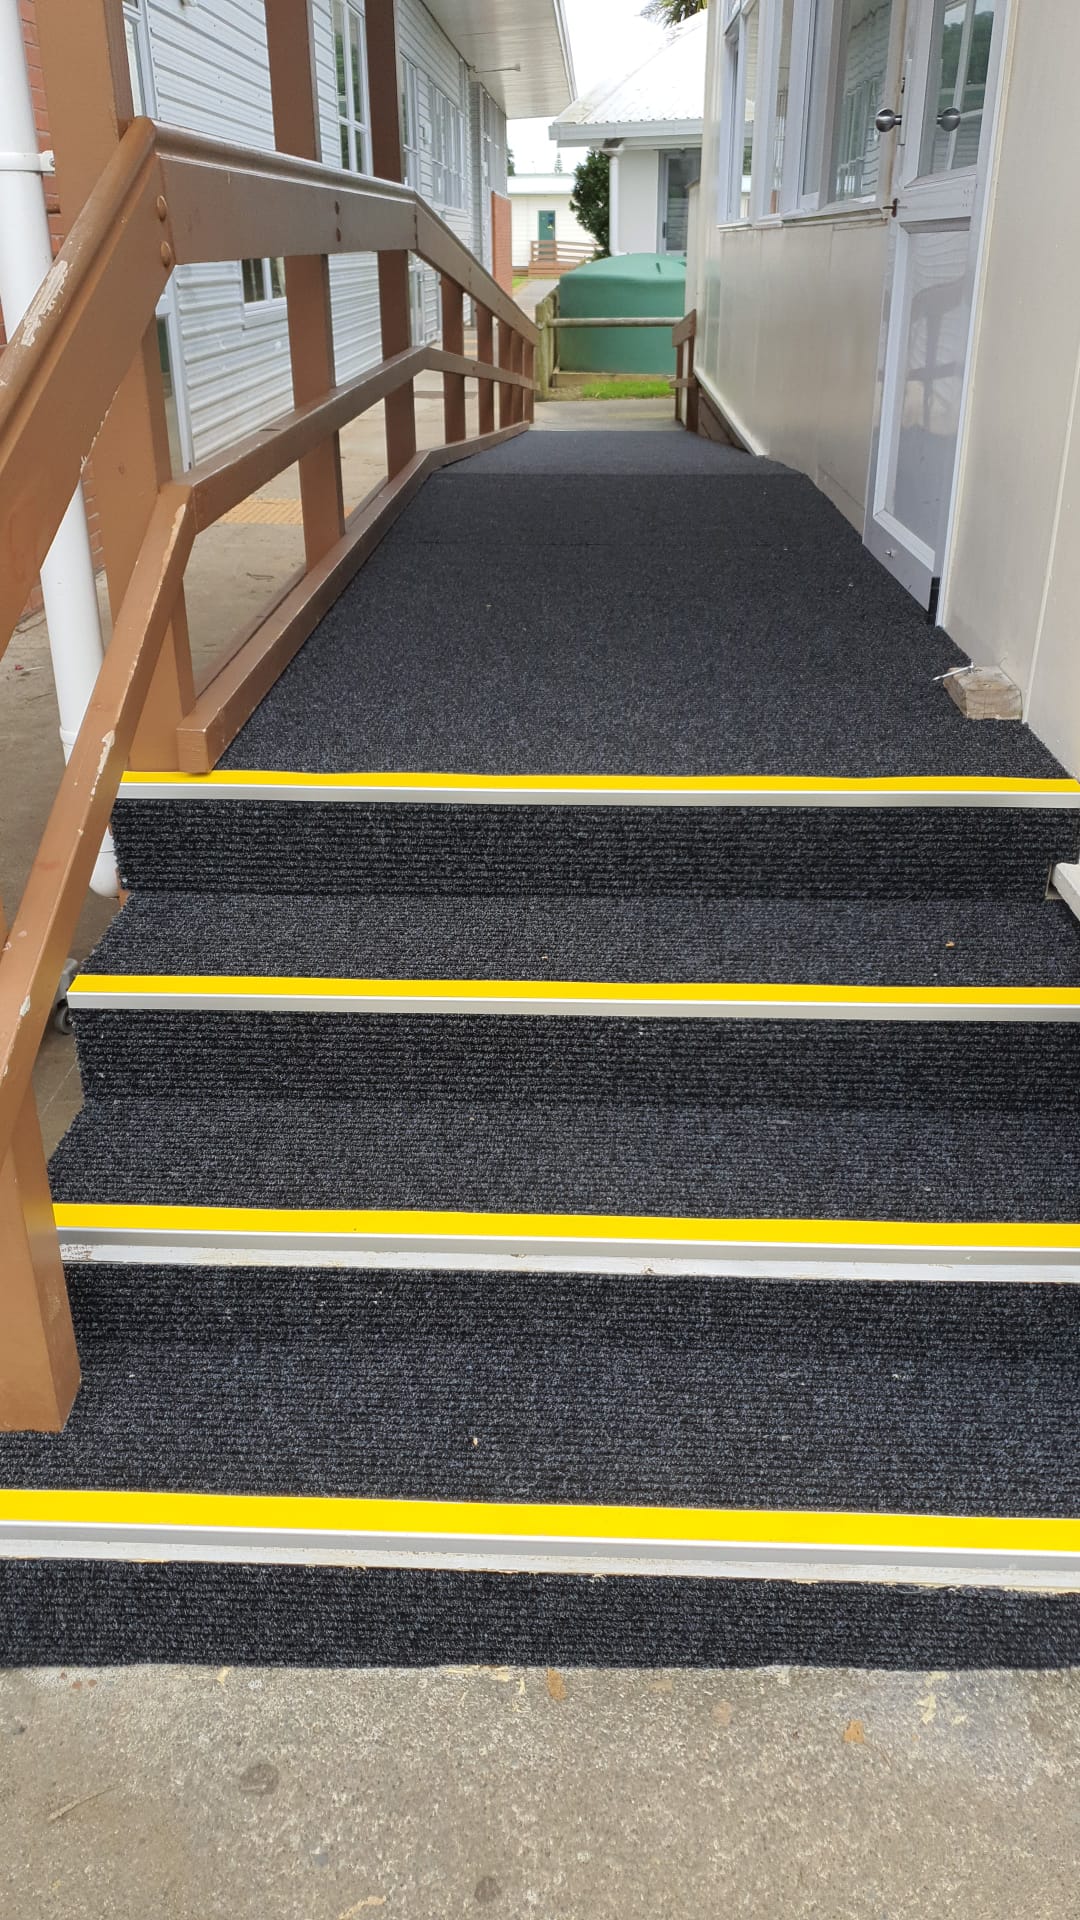 Slimrib Outdoor carpet installed on steps with safety stair nosings.